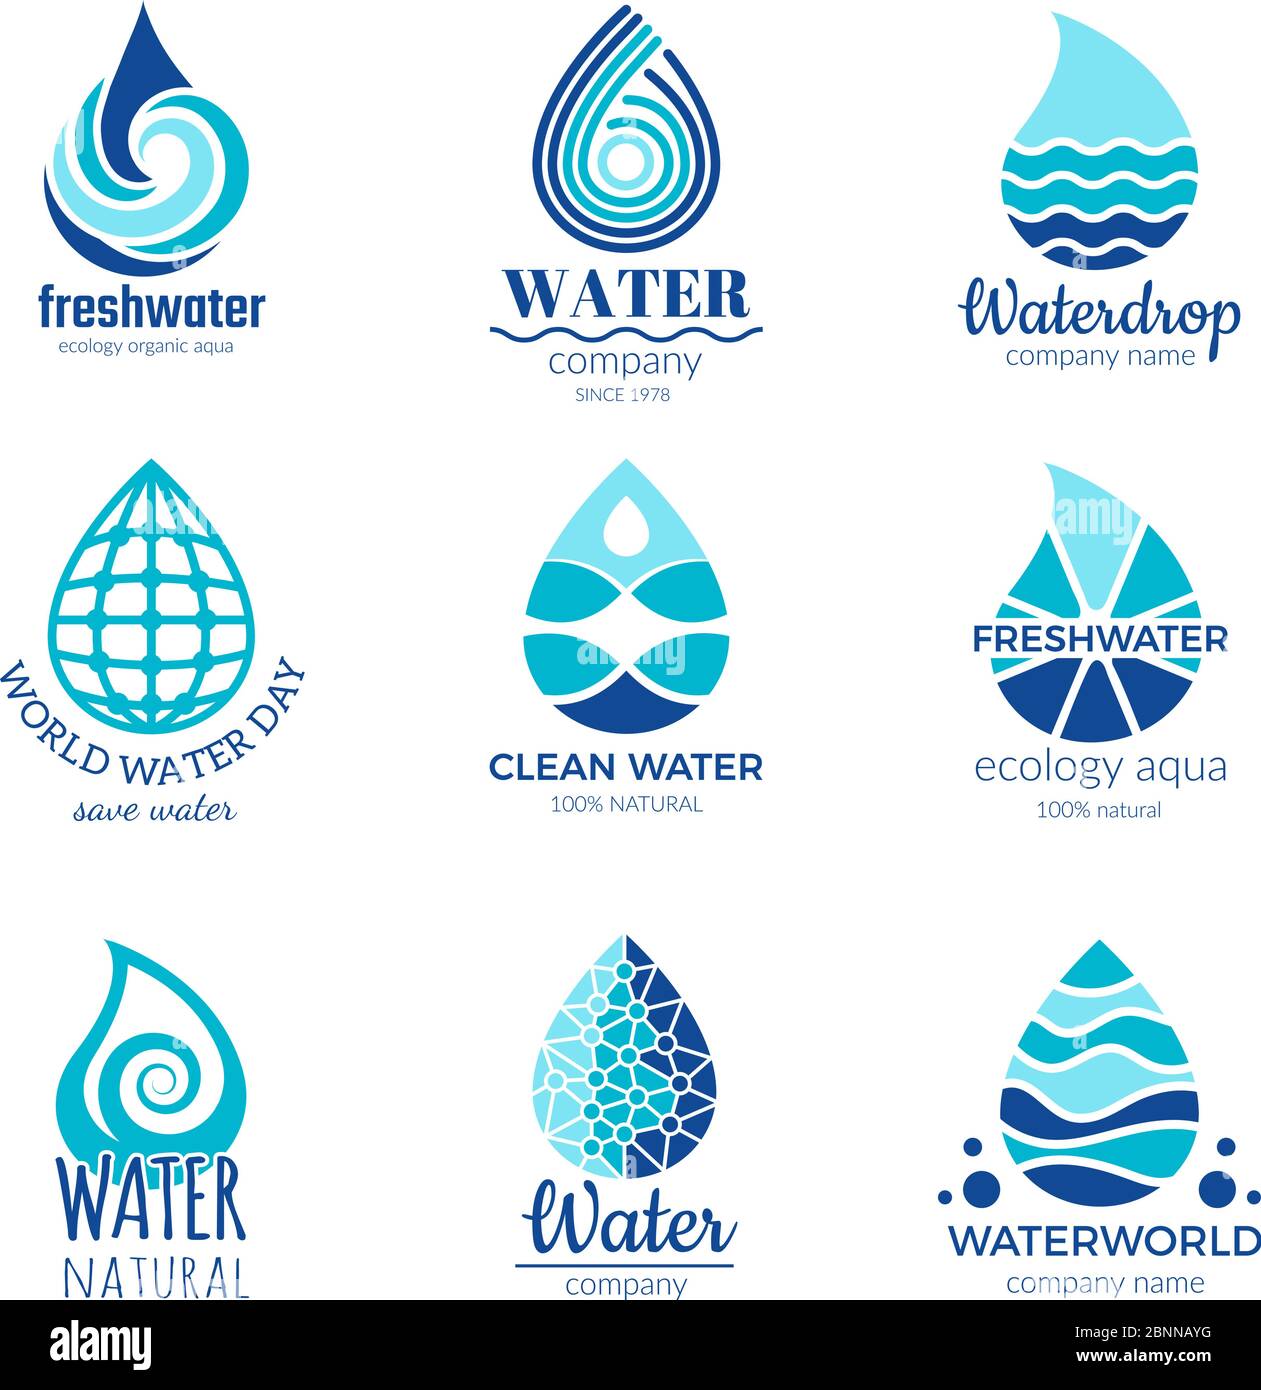 water-brand-logos-and-names